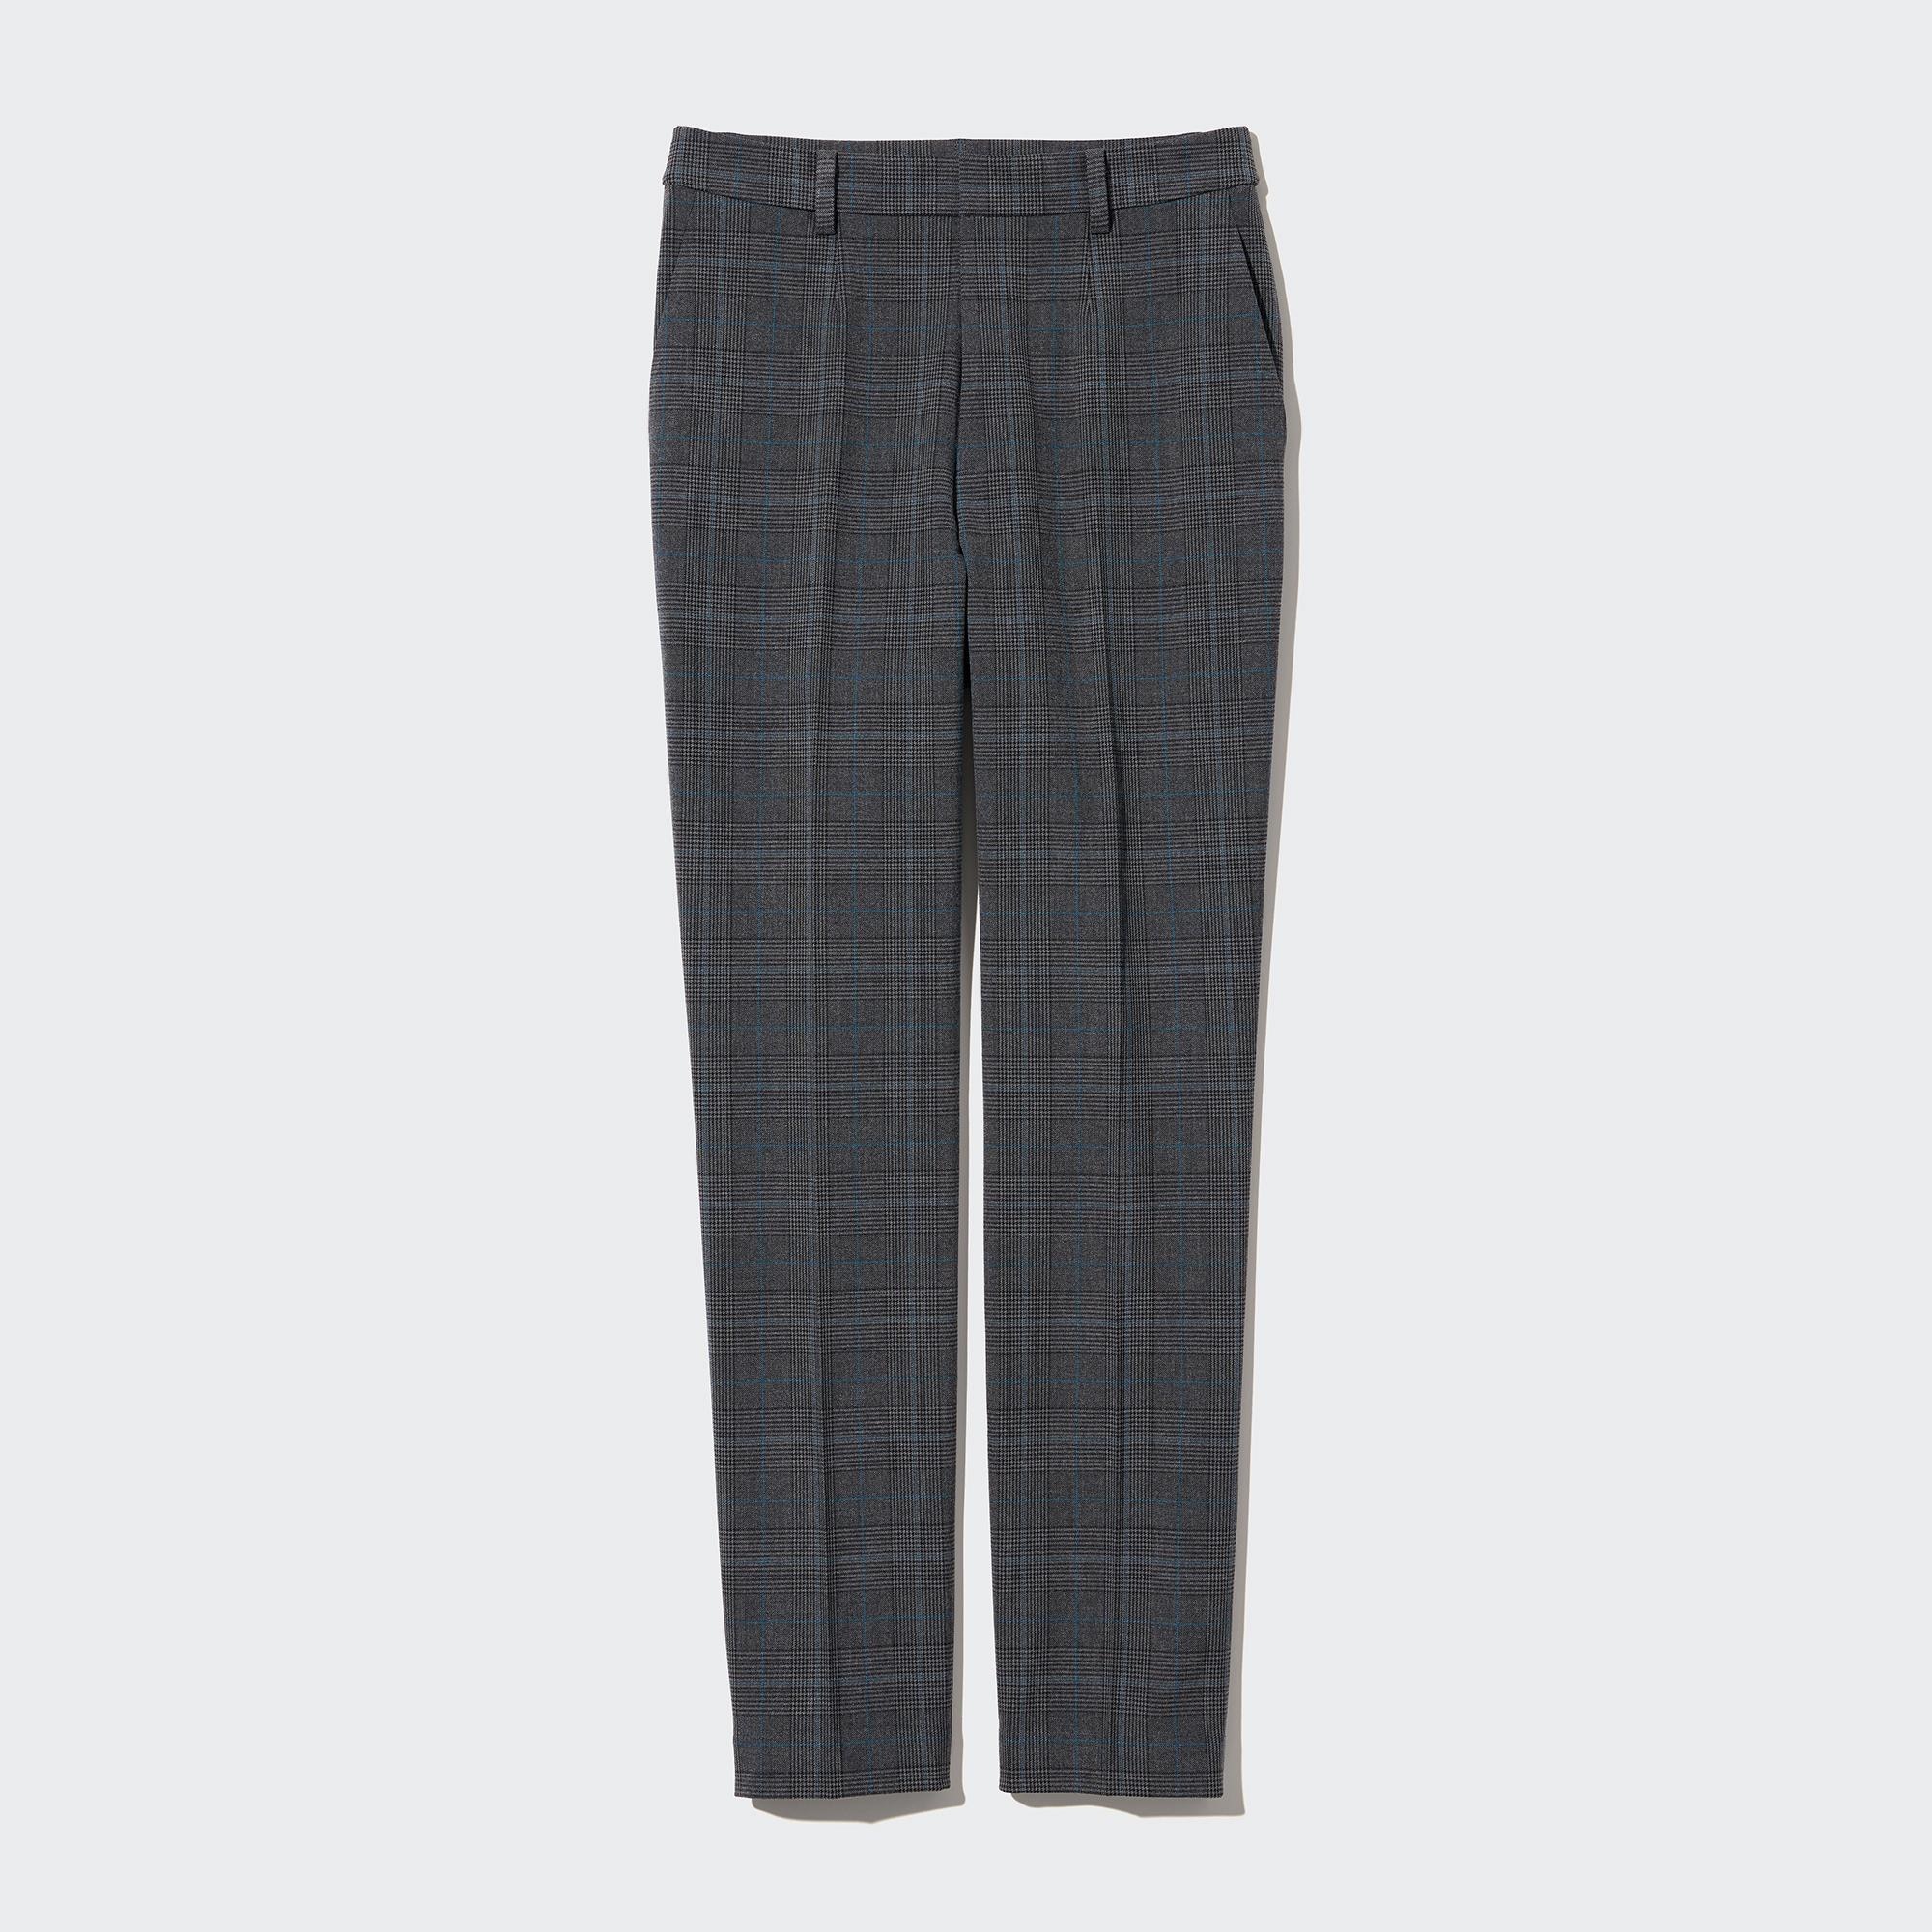 Slim Fit trousers - Grey/Checked - Men | H&M IN